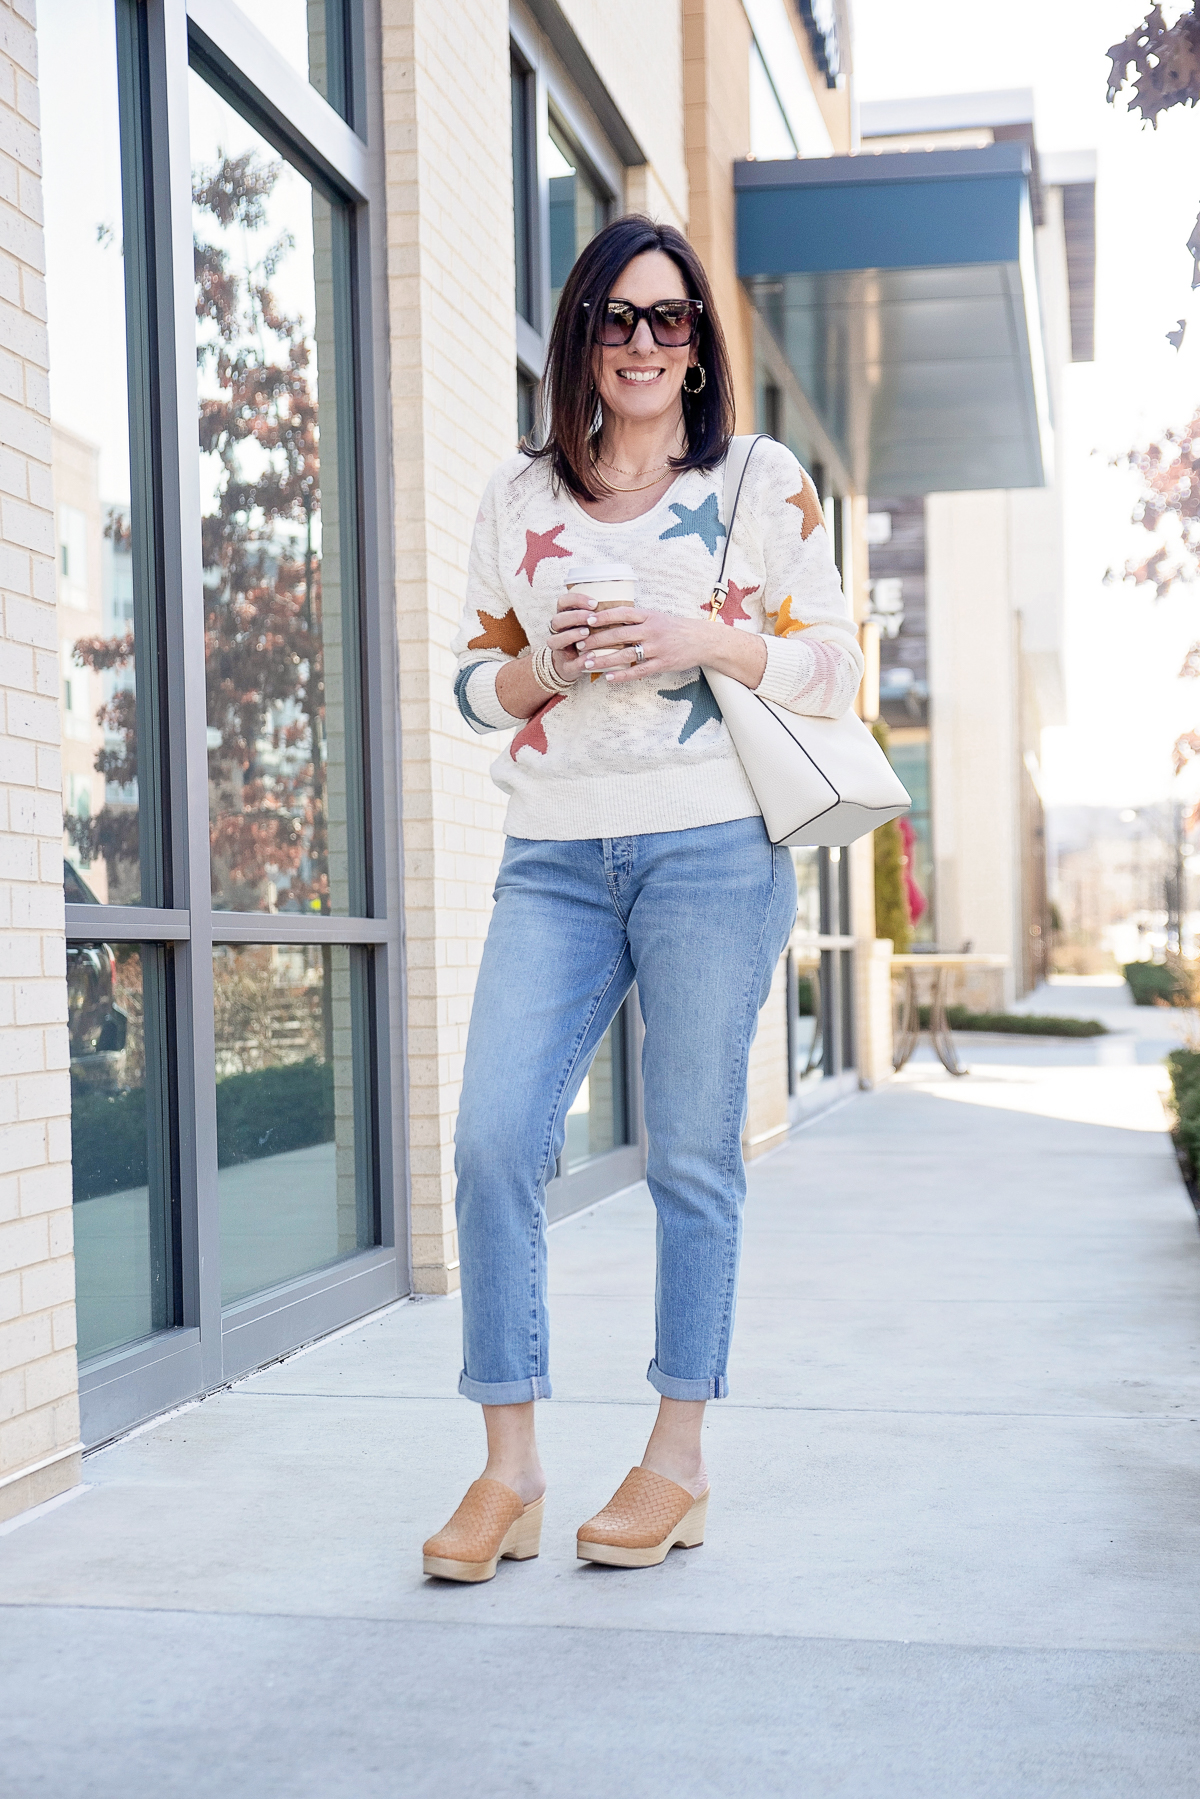 How to Wear a Spring Boyfriend Jeans Outfit with Clogs